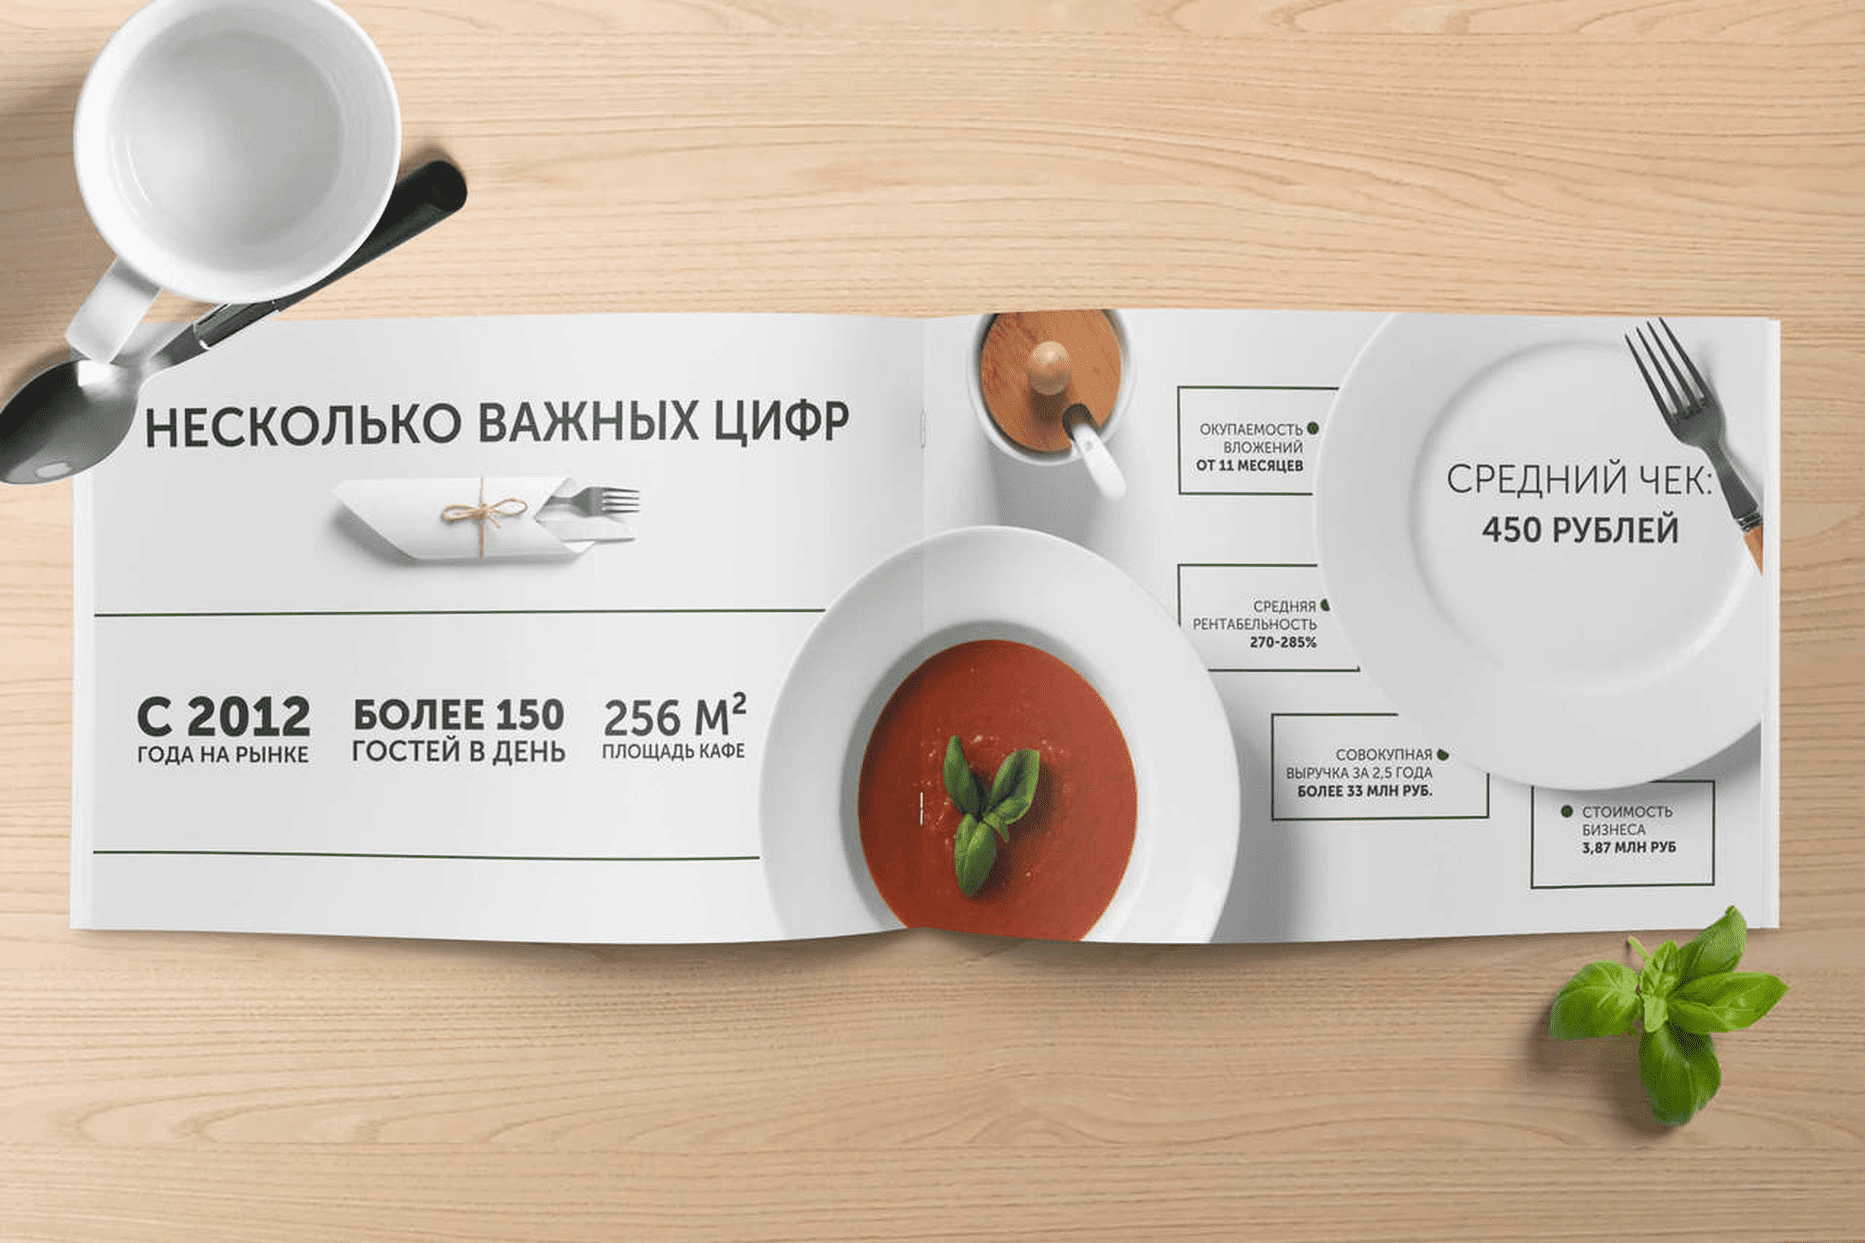 Case: marketing kit for Biscuit Cafe — Rubarb - Image - 3